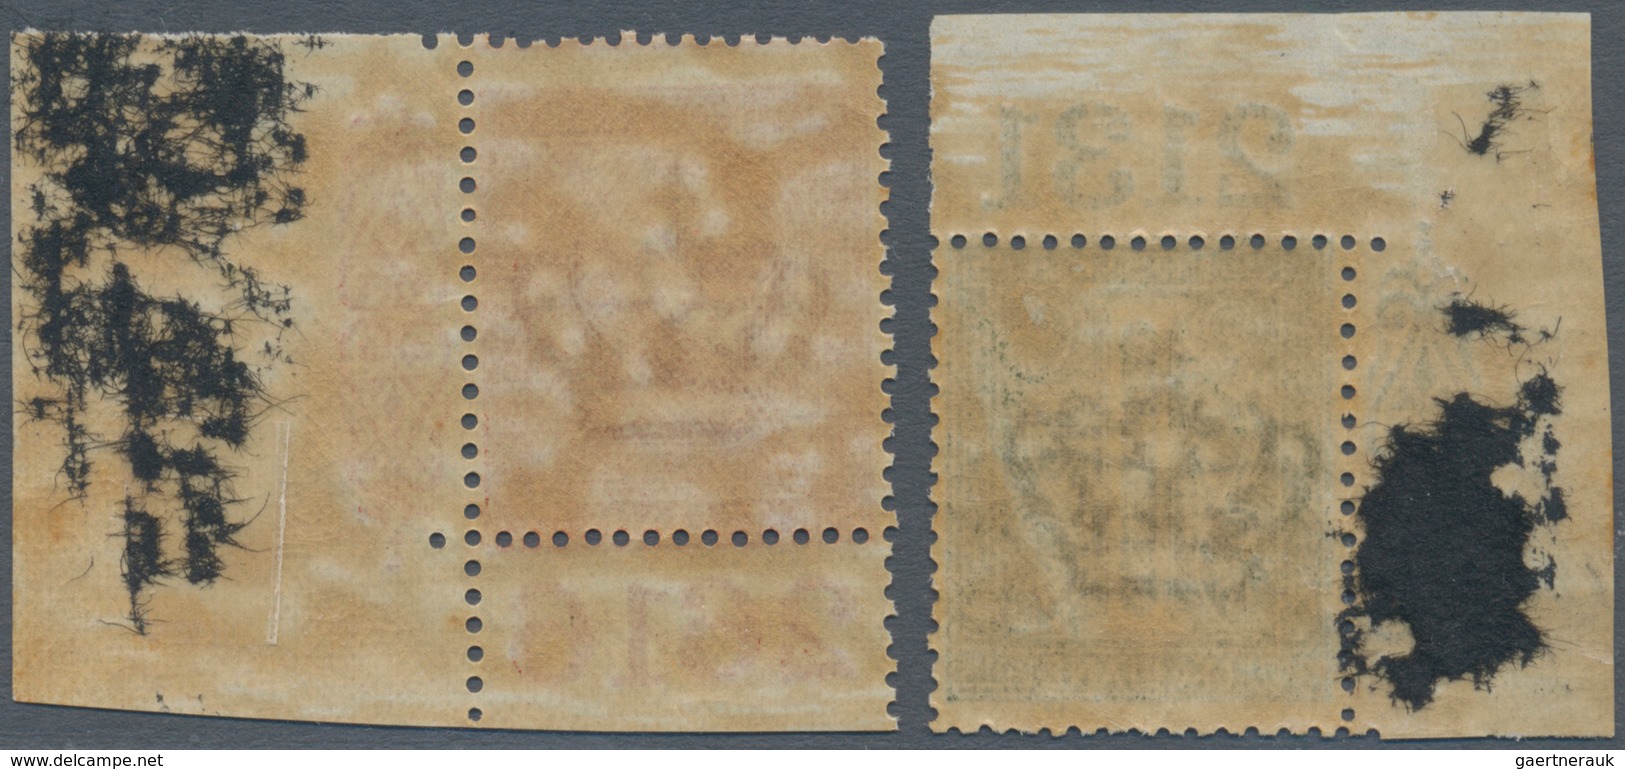 00937 Italien: 1866, 1 Cent Olive Green And 2 Cents Brick Red "digits", Turin Printing, Wide Sheet Angle W - Poststempel